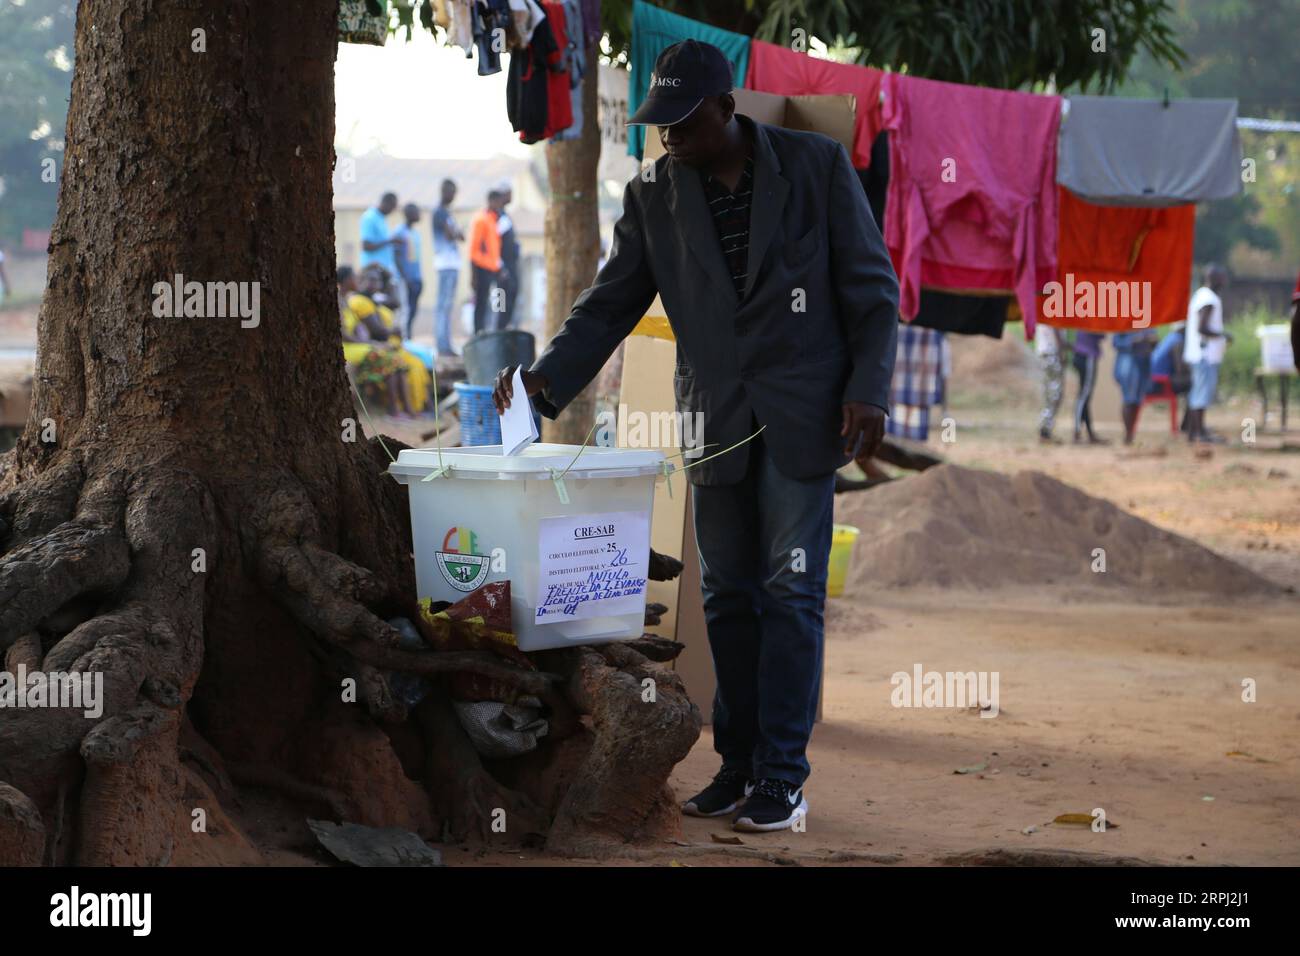 191124 -- BISSAU, Nov. 24, 2019 -- A voter casts his ballot at a polling station in Bissau, capital of Guinea-Bissau, on Nov. 24, 2019. Guinea-Bissau s presidential election kicked off Sunday with 12 candidates competing to become the west African country s president for the next five years.  GUINEA-BISSAU-BISSAU-PRESIDENTIAL ELECTION XingxJianqiao PUBLICATIONxNOTxINxCHN Stock Photo